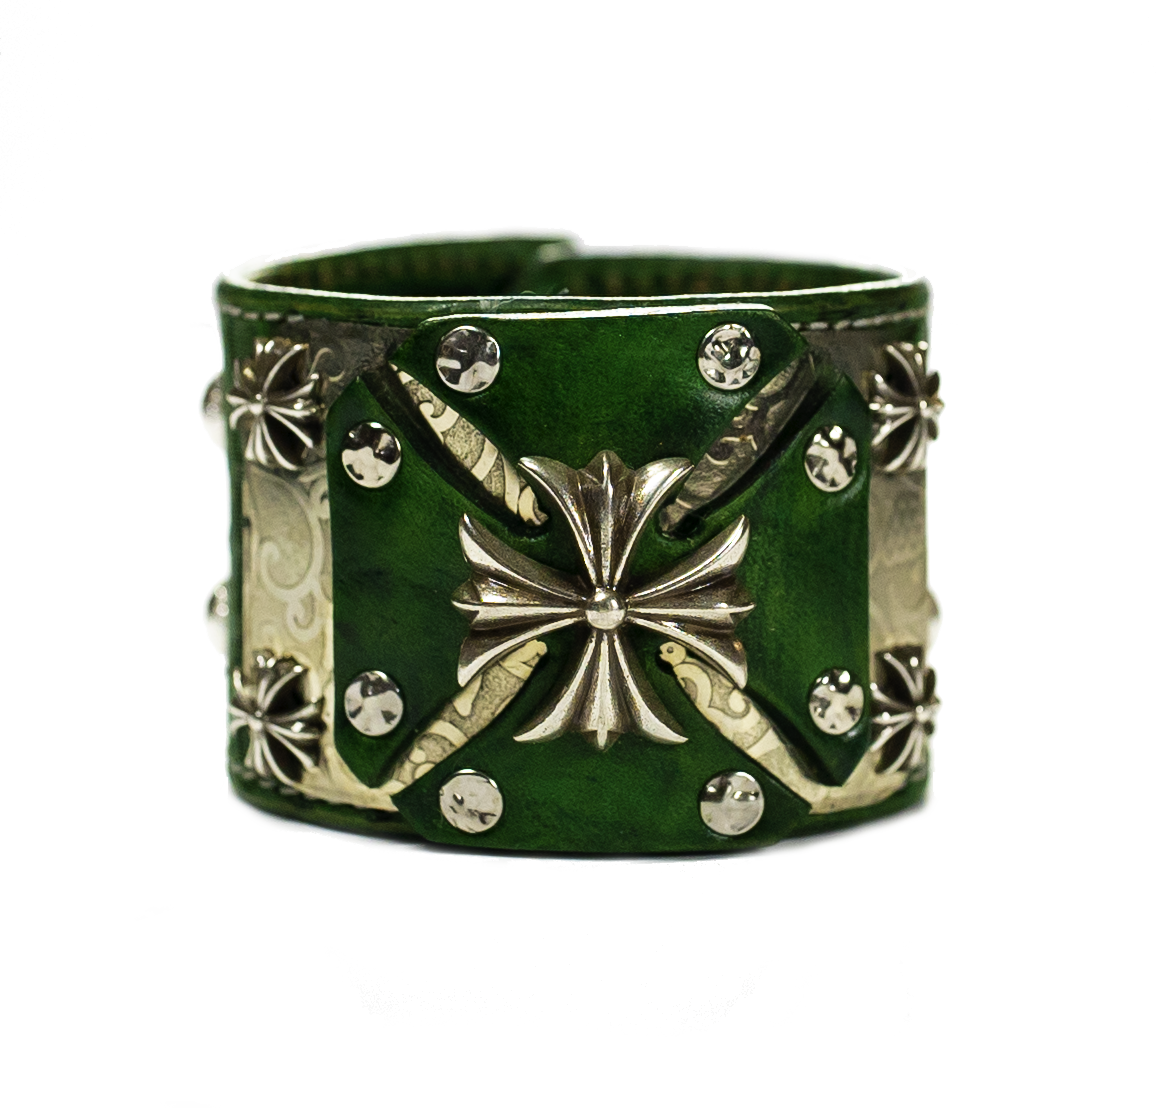 Sir Charles - Green on Green Leather Bracelet front